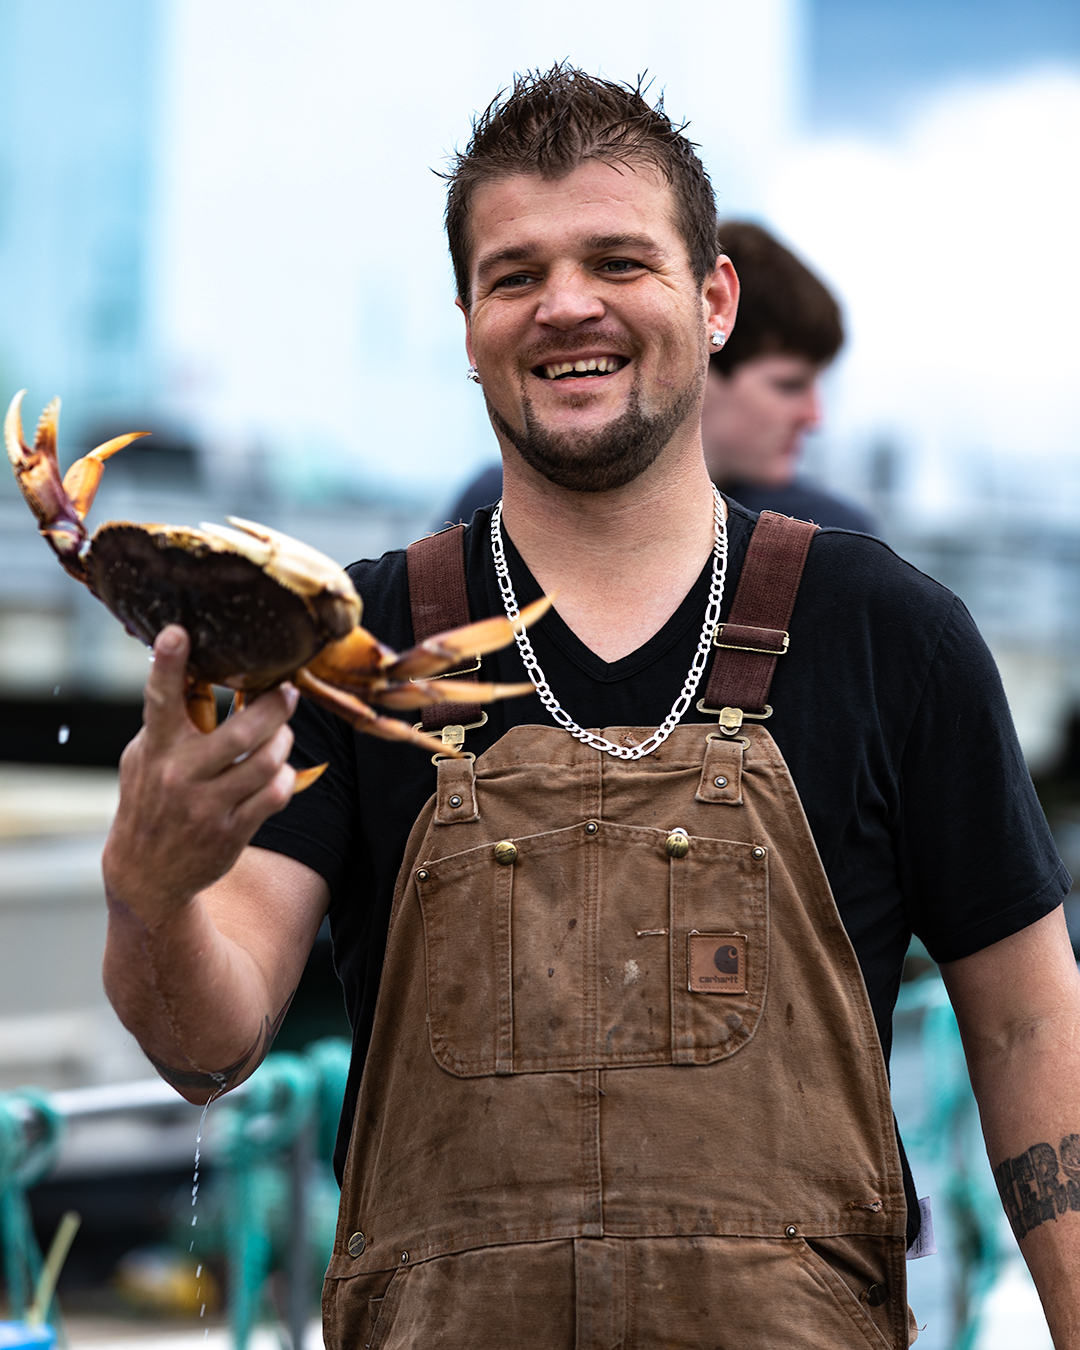 Portrait of Man Holding a Crab in the San Francisco Bay Area (Copy)